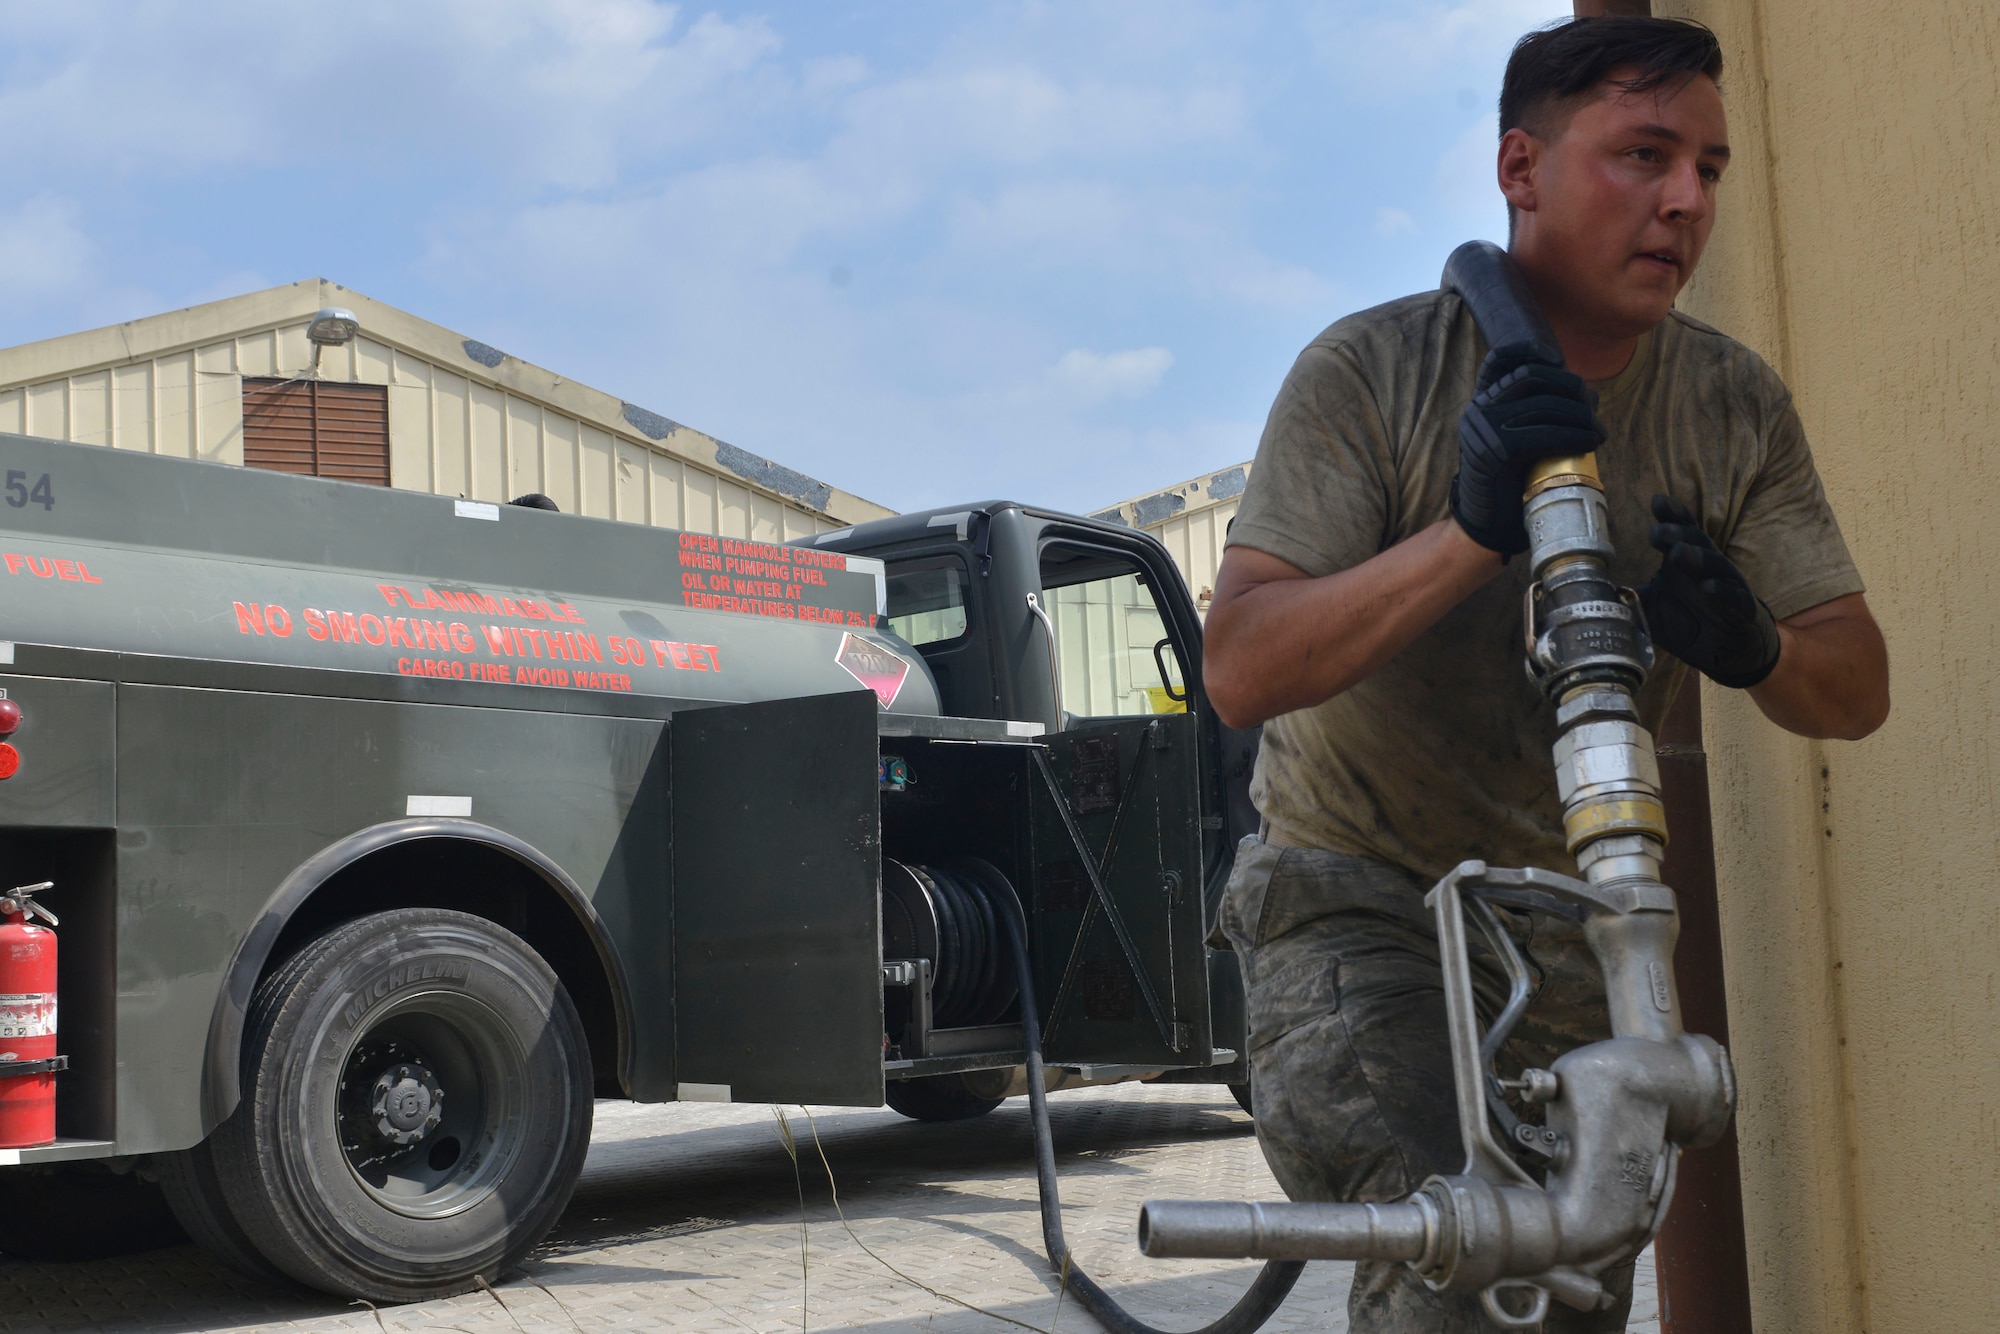 U.S. Air Force Airman 1st Class Trenton Beard, 39th Logistics Readiness Squadron fuels specialist, carries a hose to a generator July 19, 2016, at Incirlik Air Base, Turkey. Base personnel worked to keep electrical power supplied to the installation, ensuring mission readiness. (U.S. Air Force photo by Senior Airman John Nieves Camacho)